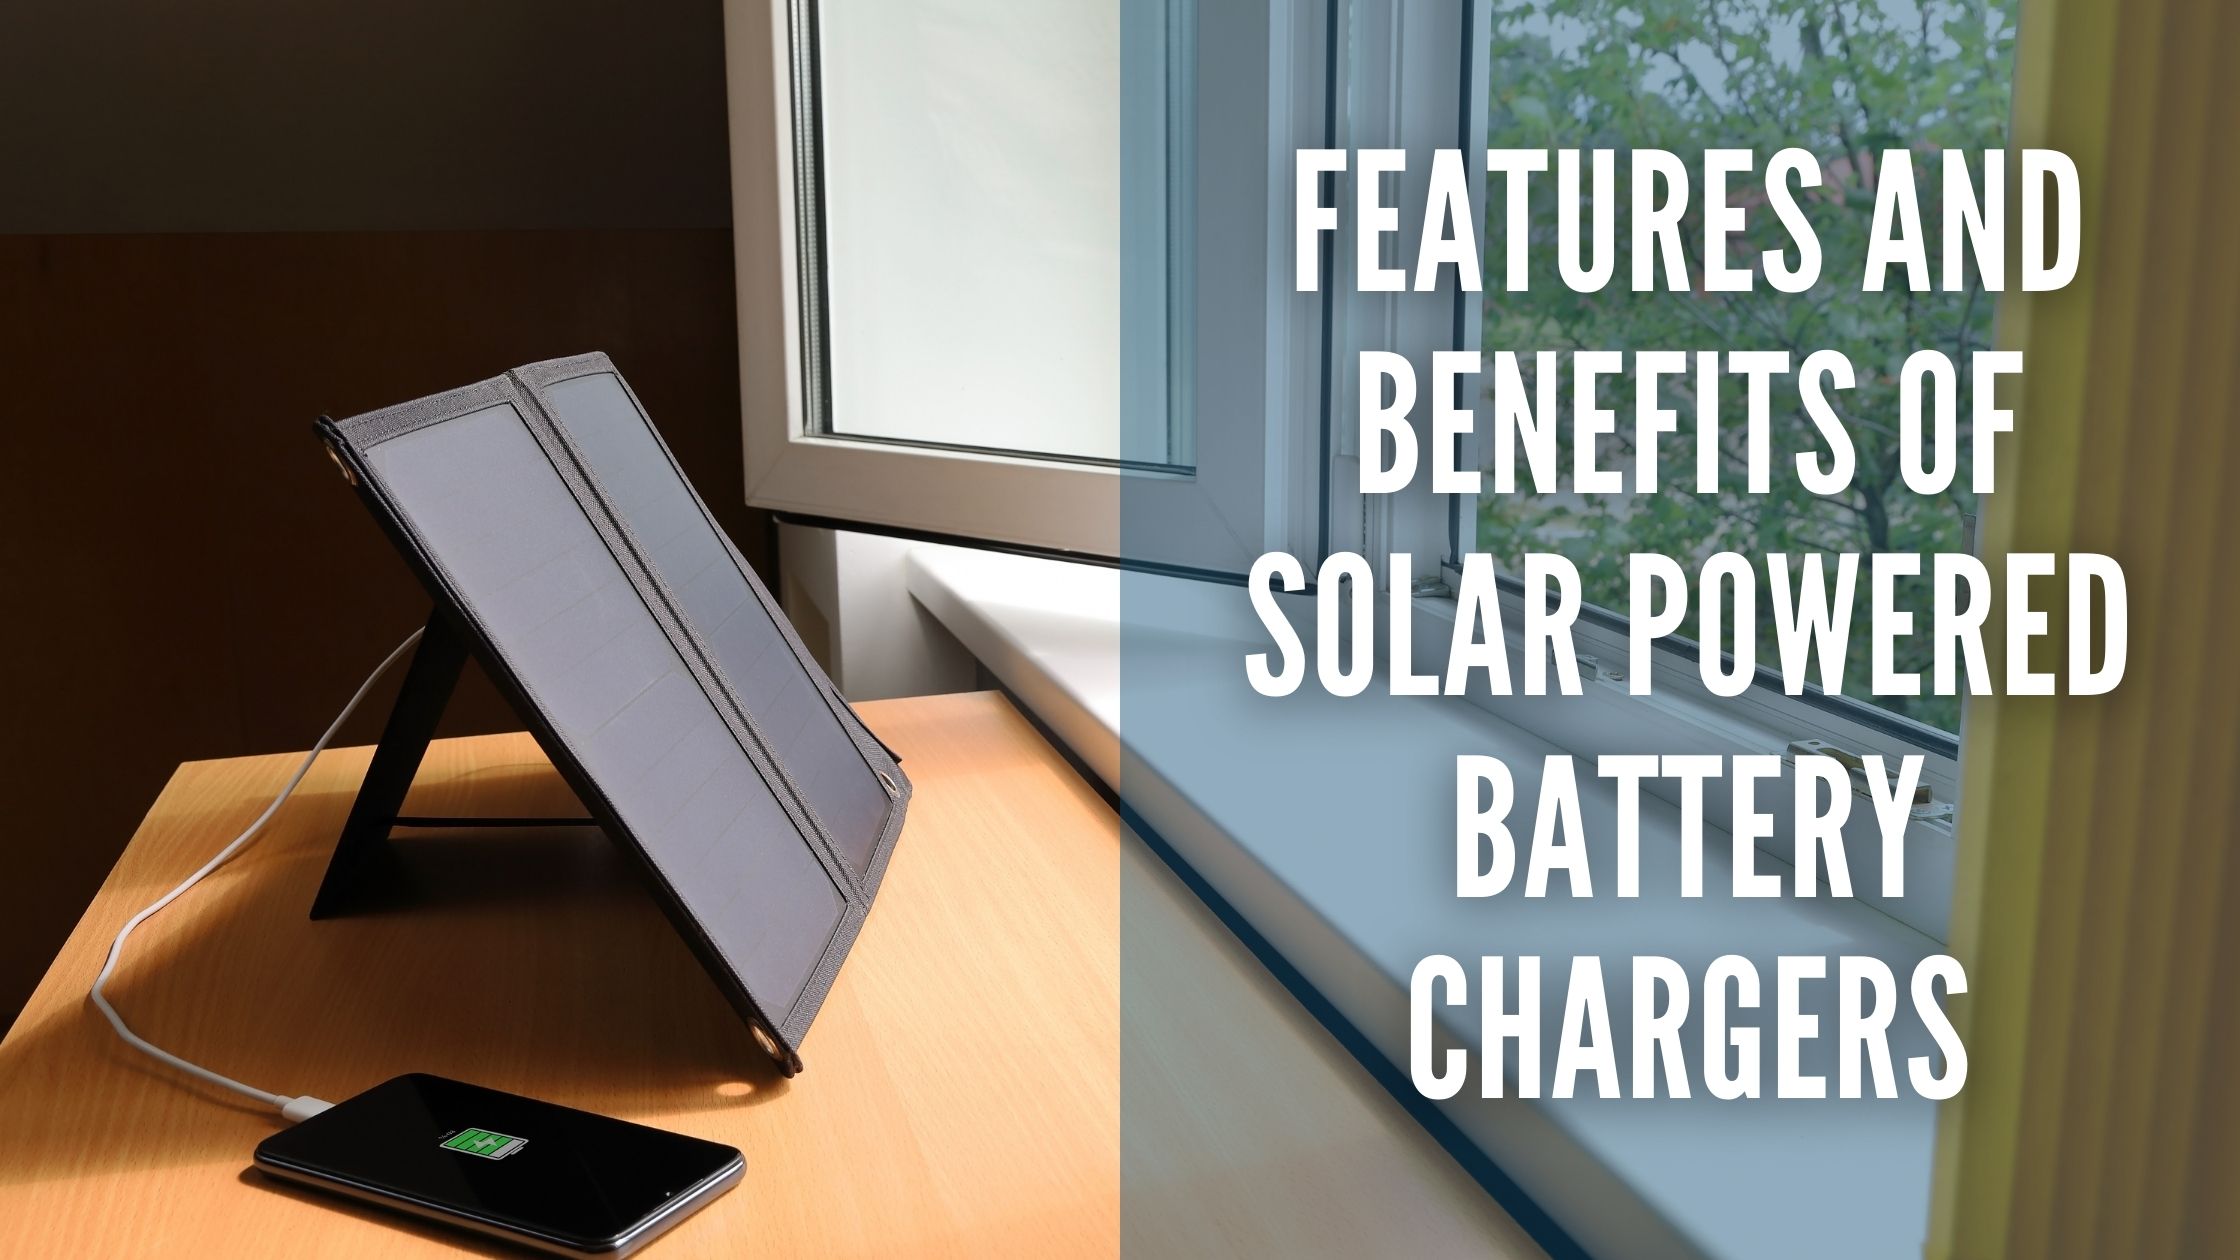 https://www.sepco-solarlighting.com/hubfs/Blog_Pics/Features%20and%20Benefits%20of%20Solar%20Powered%20Battery%20Chargers.jpg